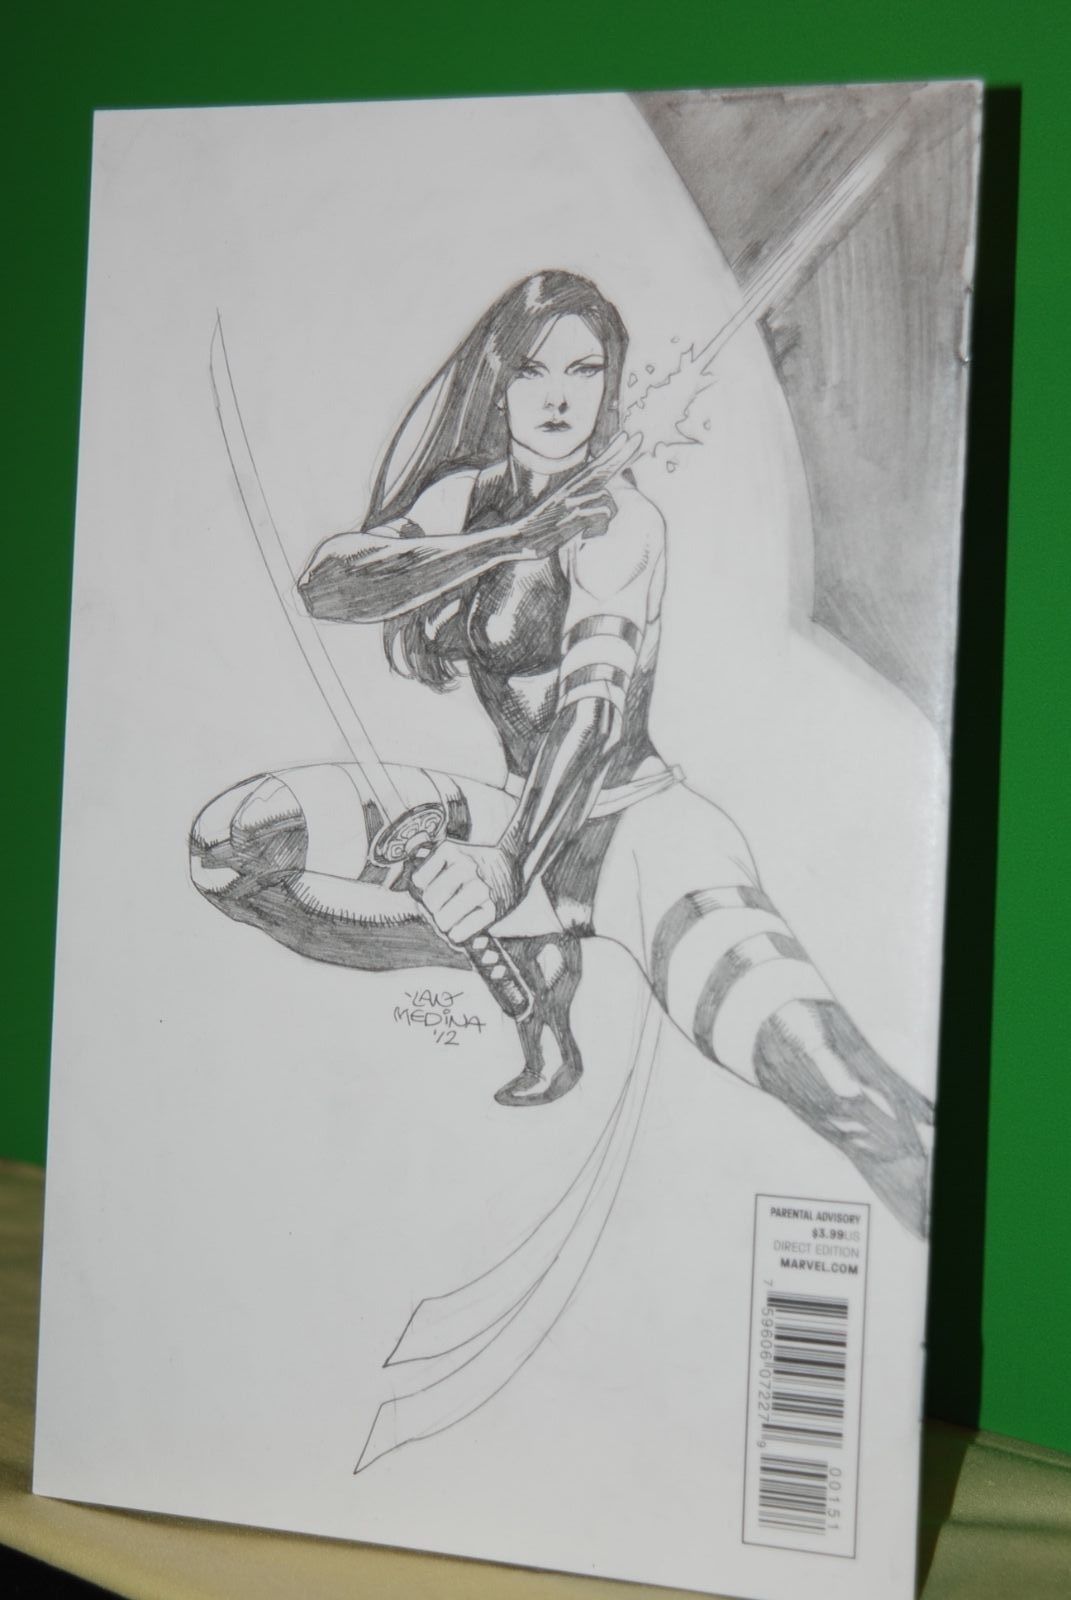 UNCANNY X-FORCE (2010) #1Variant MARVEL (COVER Sketch By MEDINA) NM+